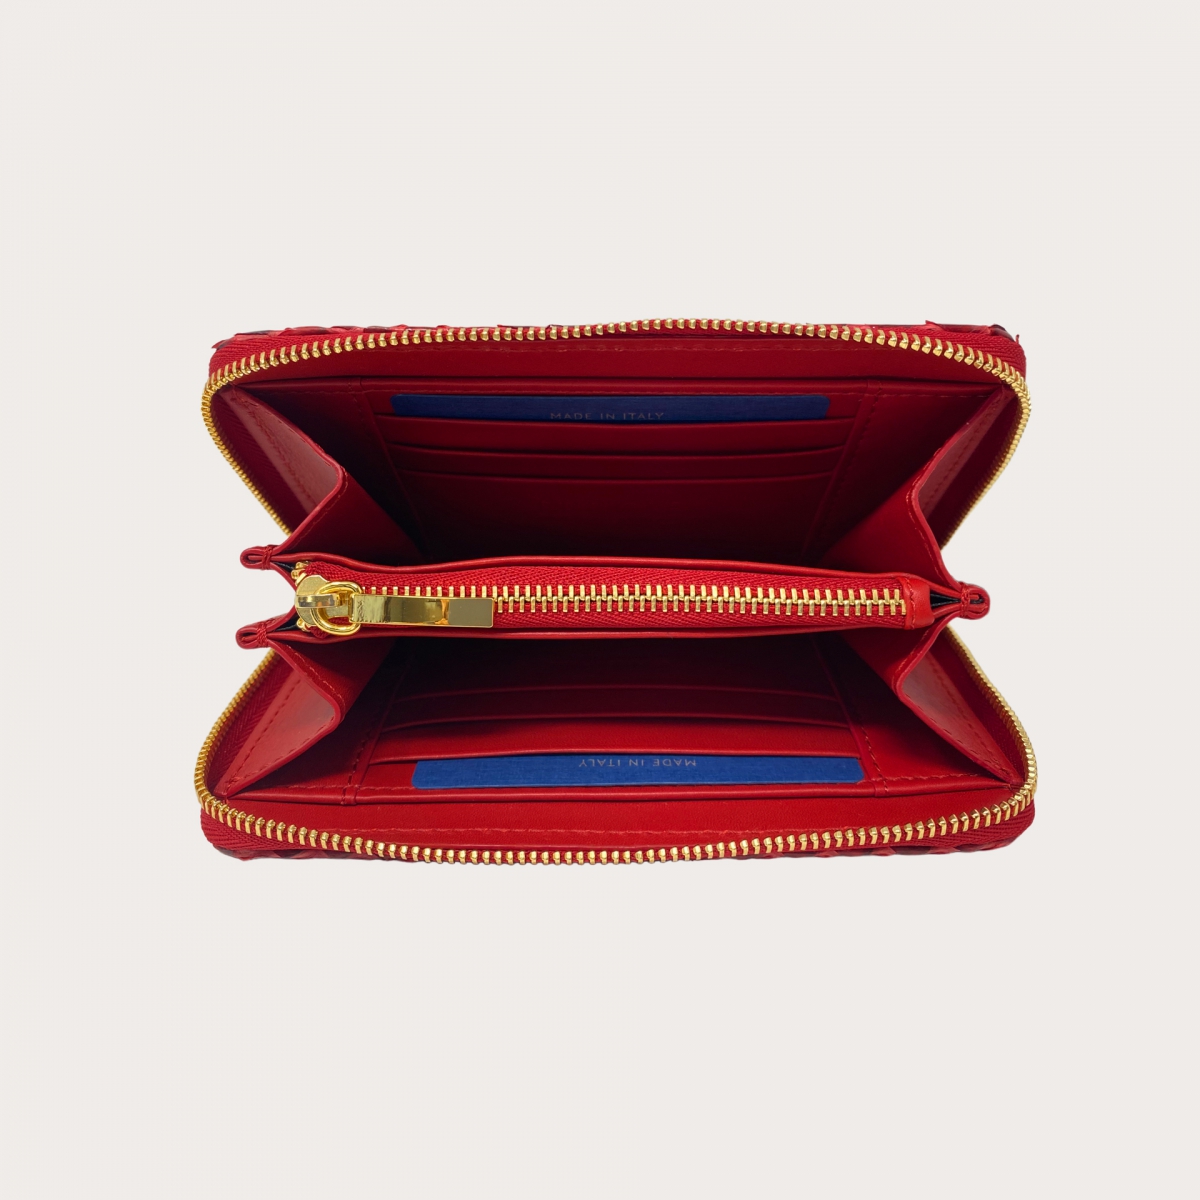 Fiery Red Leather Small Saffiano Compact Wallet